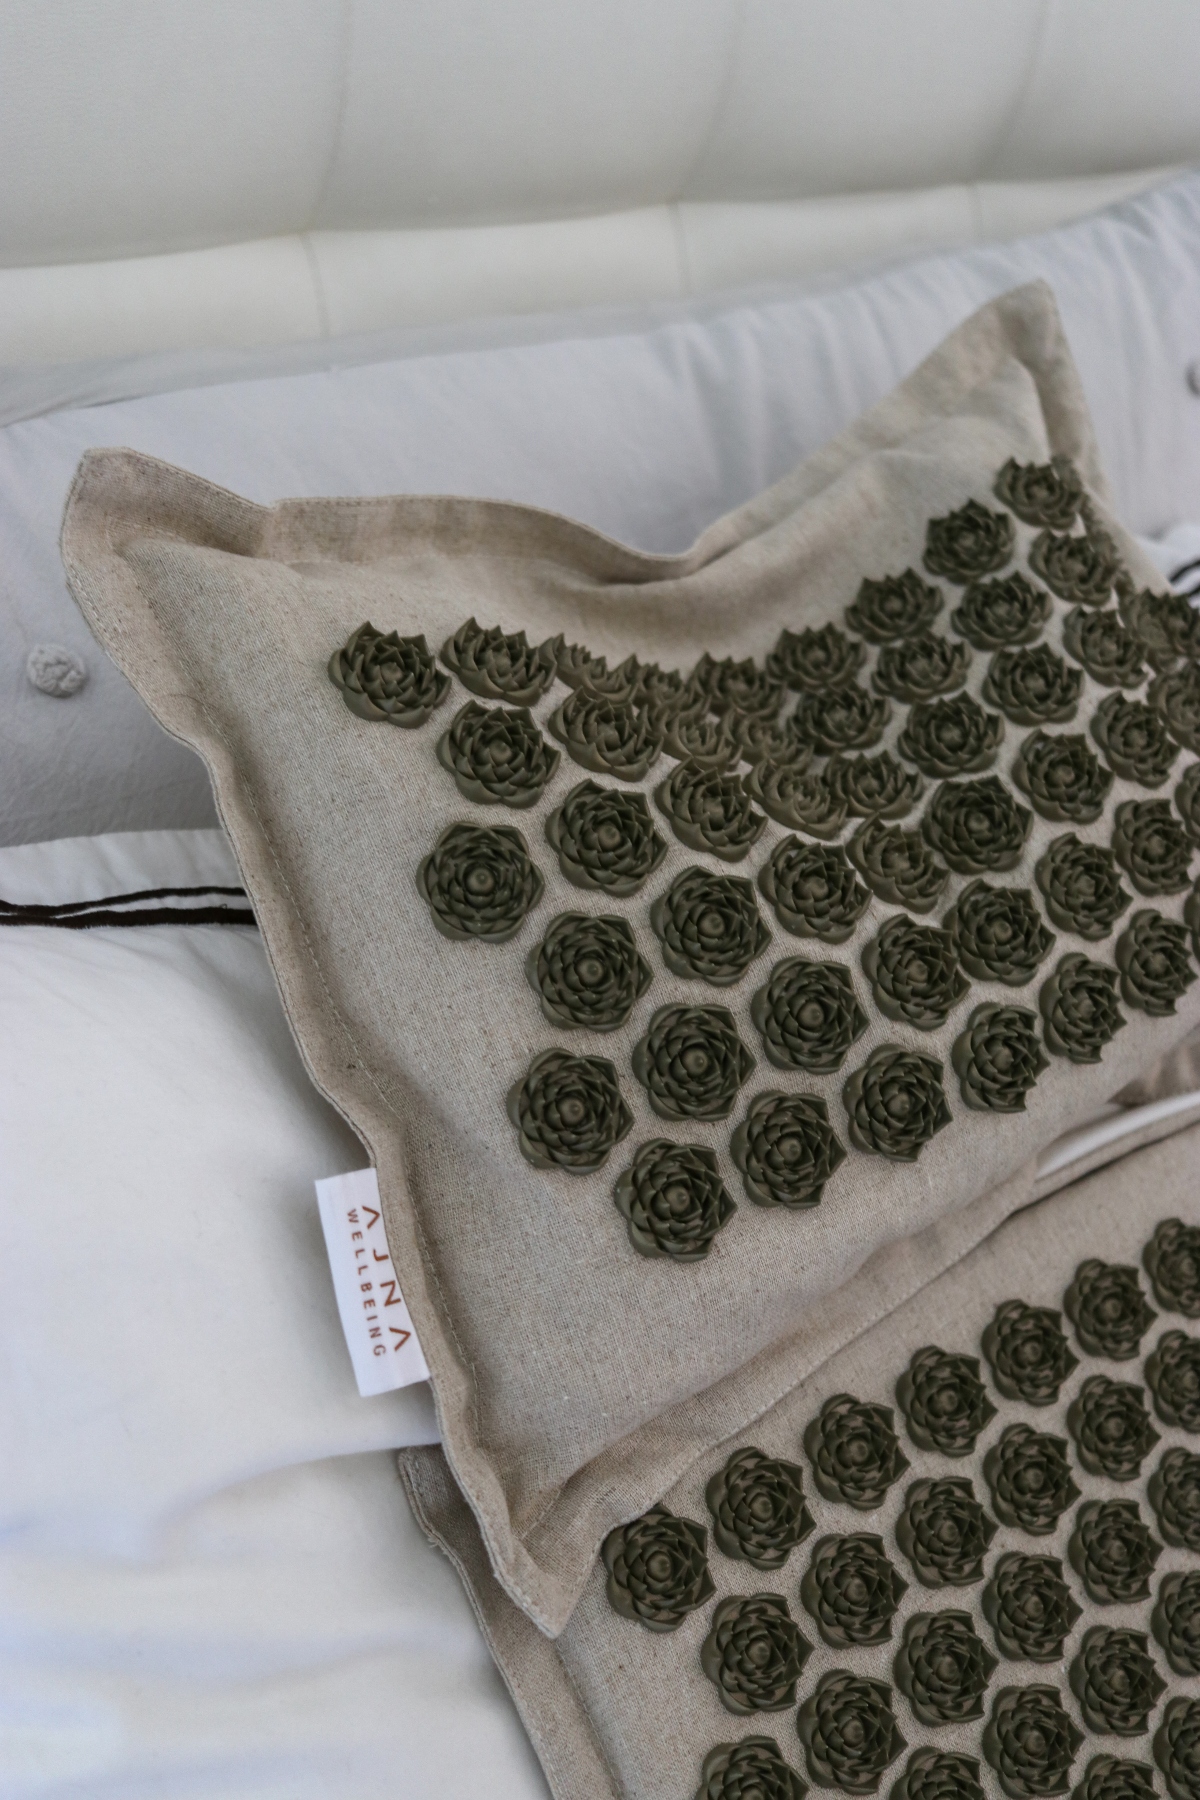 A natural approach to healing: Acupressure mats and pillows